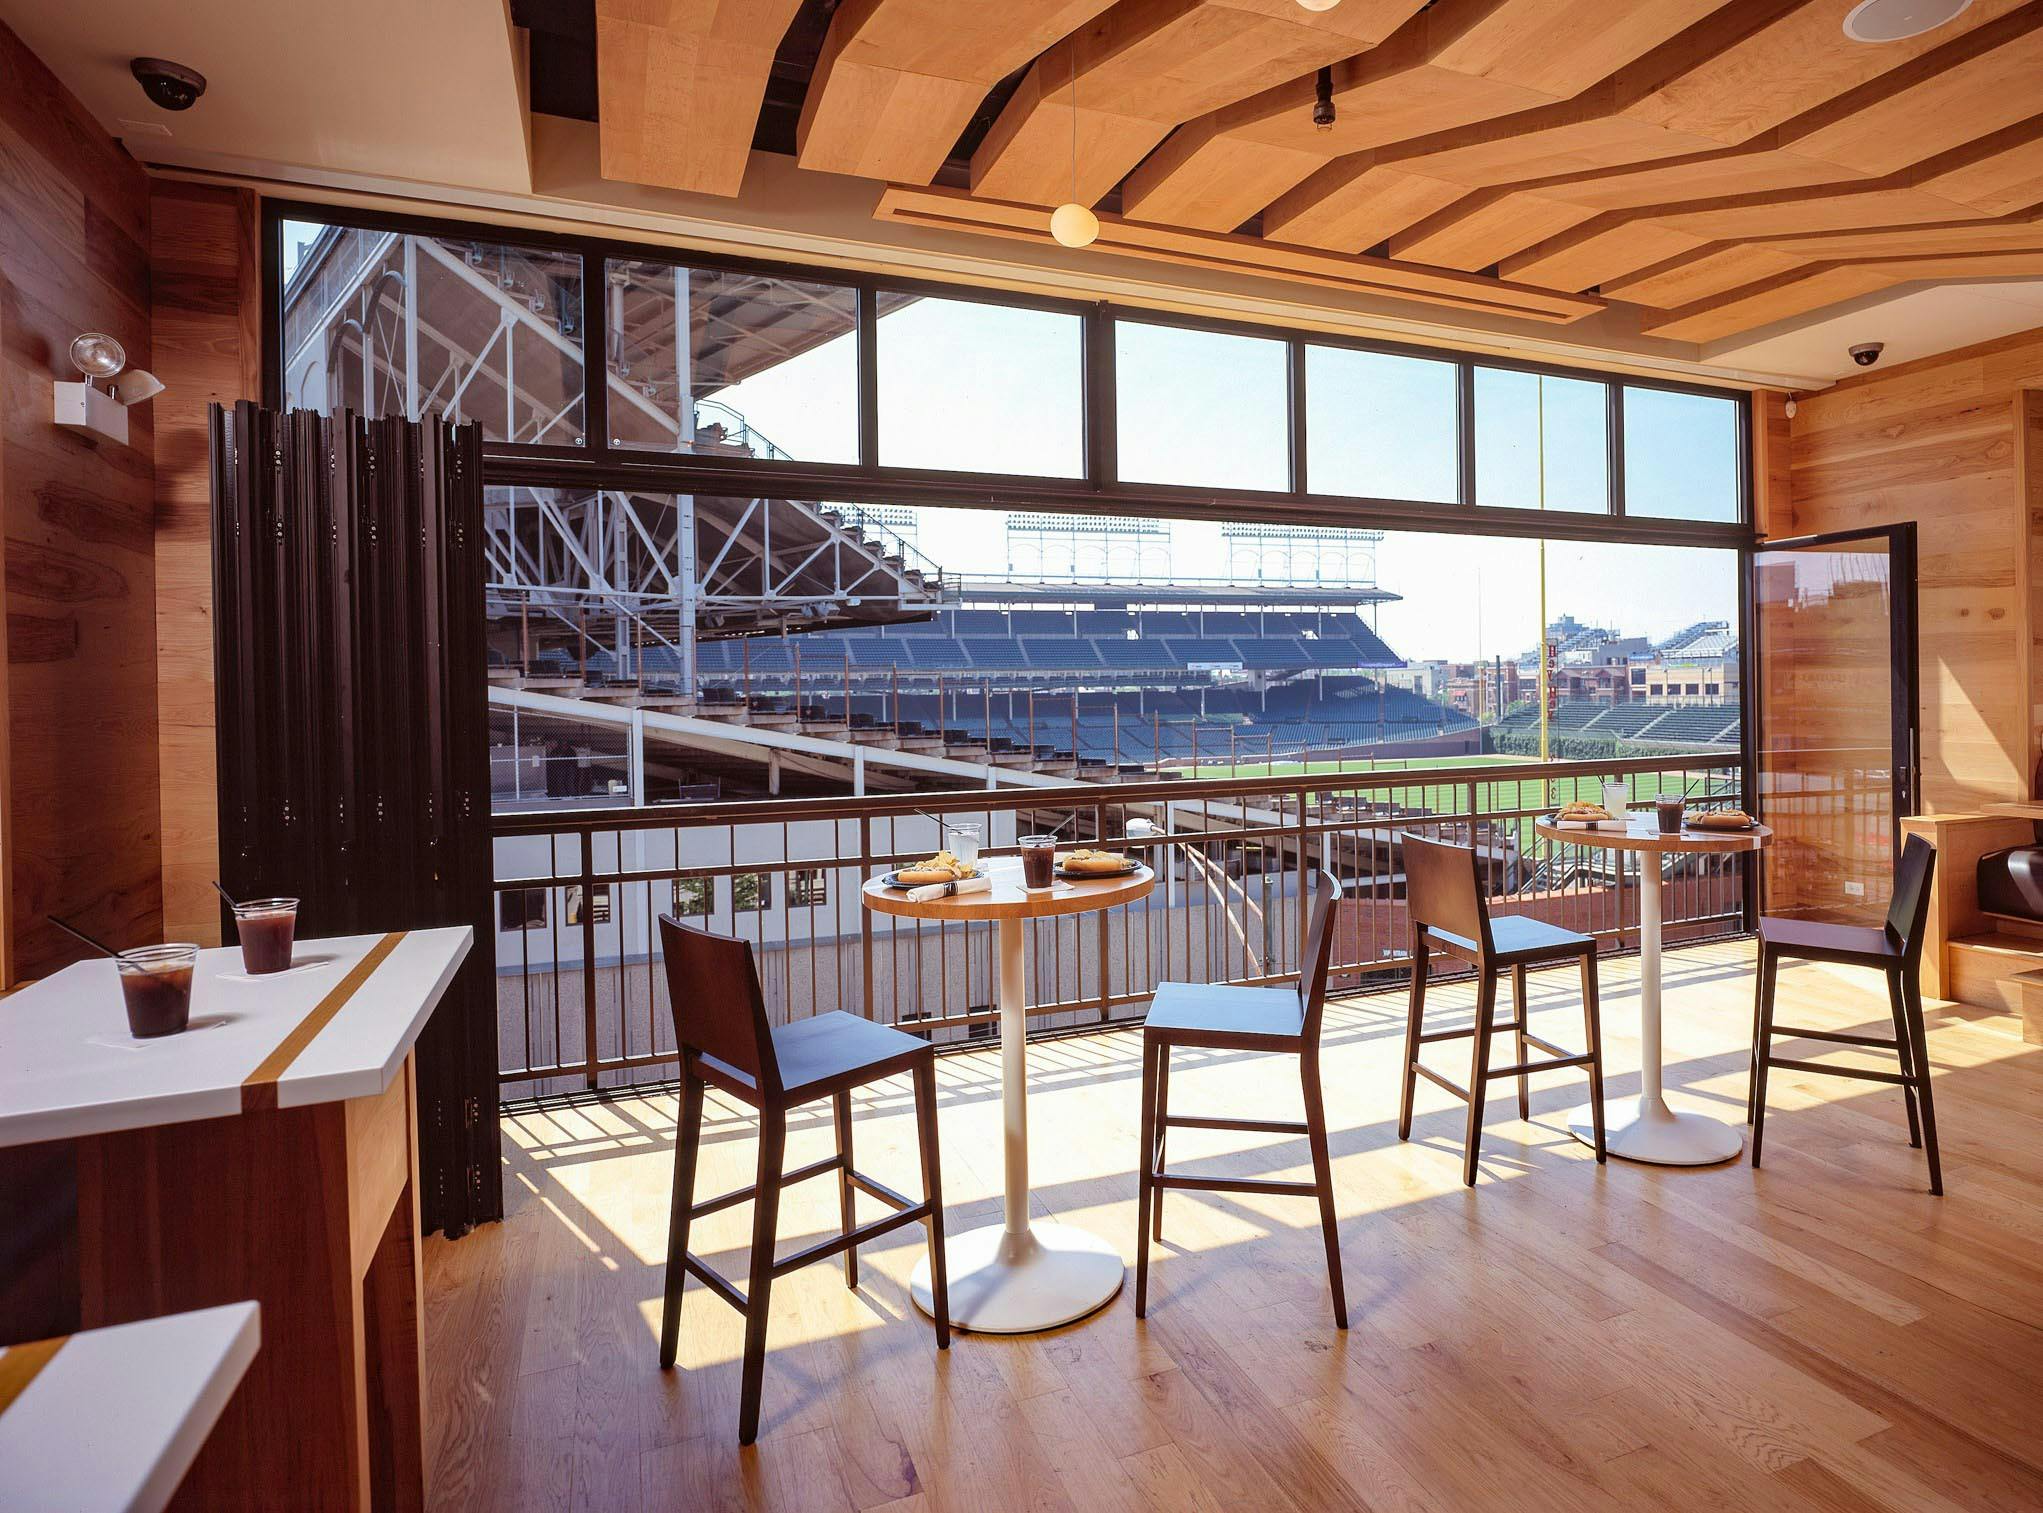 wrigley rooftops hospitality venue with folding glass wall open for view of baseball field